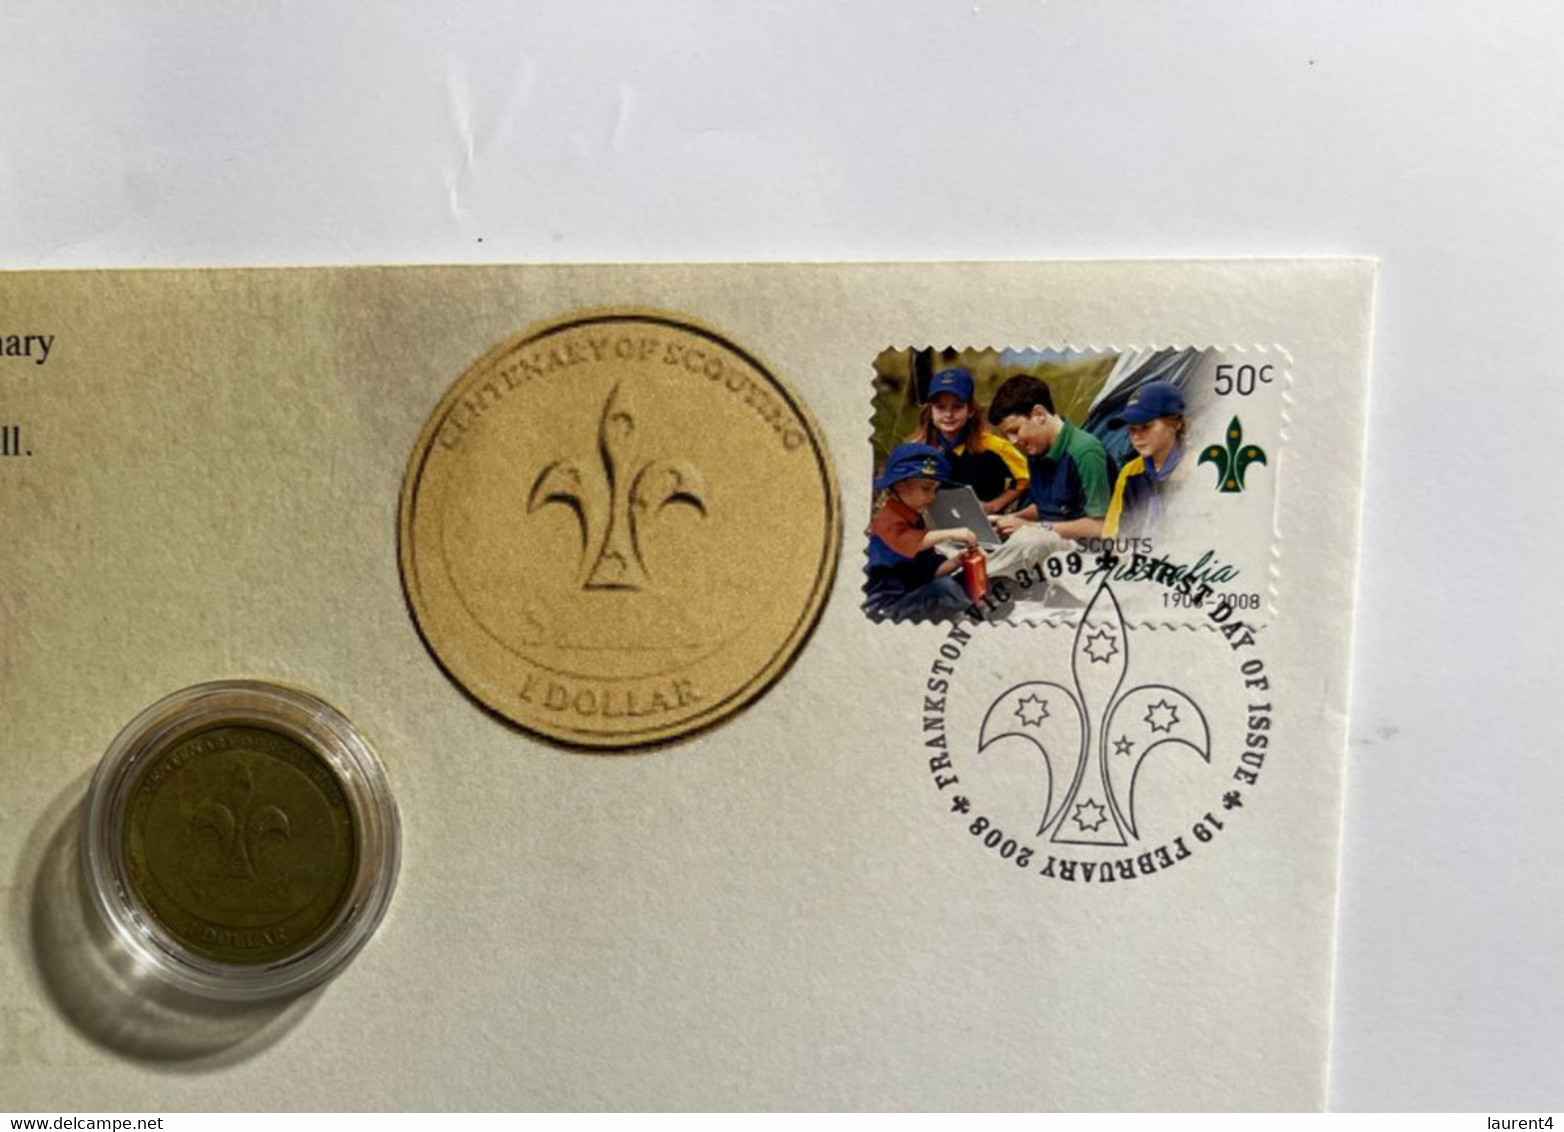 (1 N 18) Australia - $ 1.00 Centenary Of Scouting 2008 Coin Scouts Centenary FDC Cover (matching) - Dollar